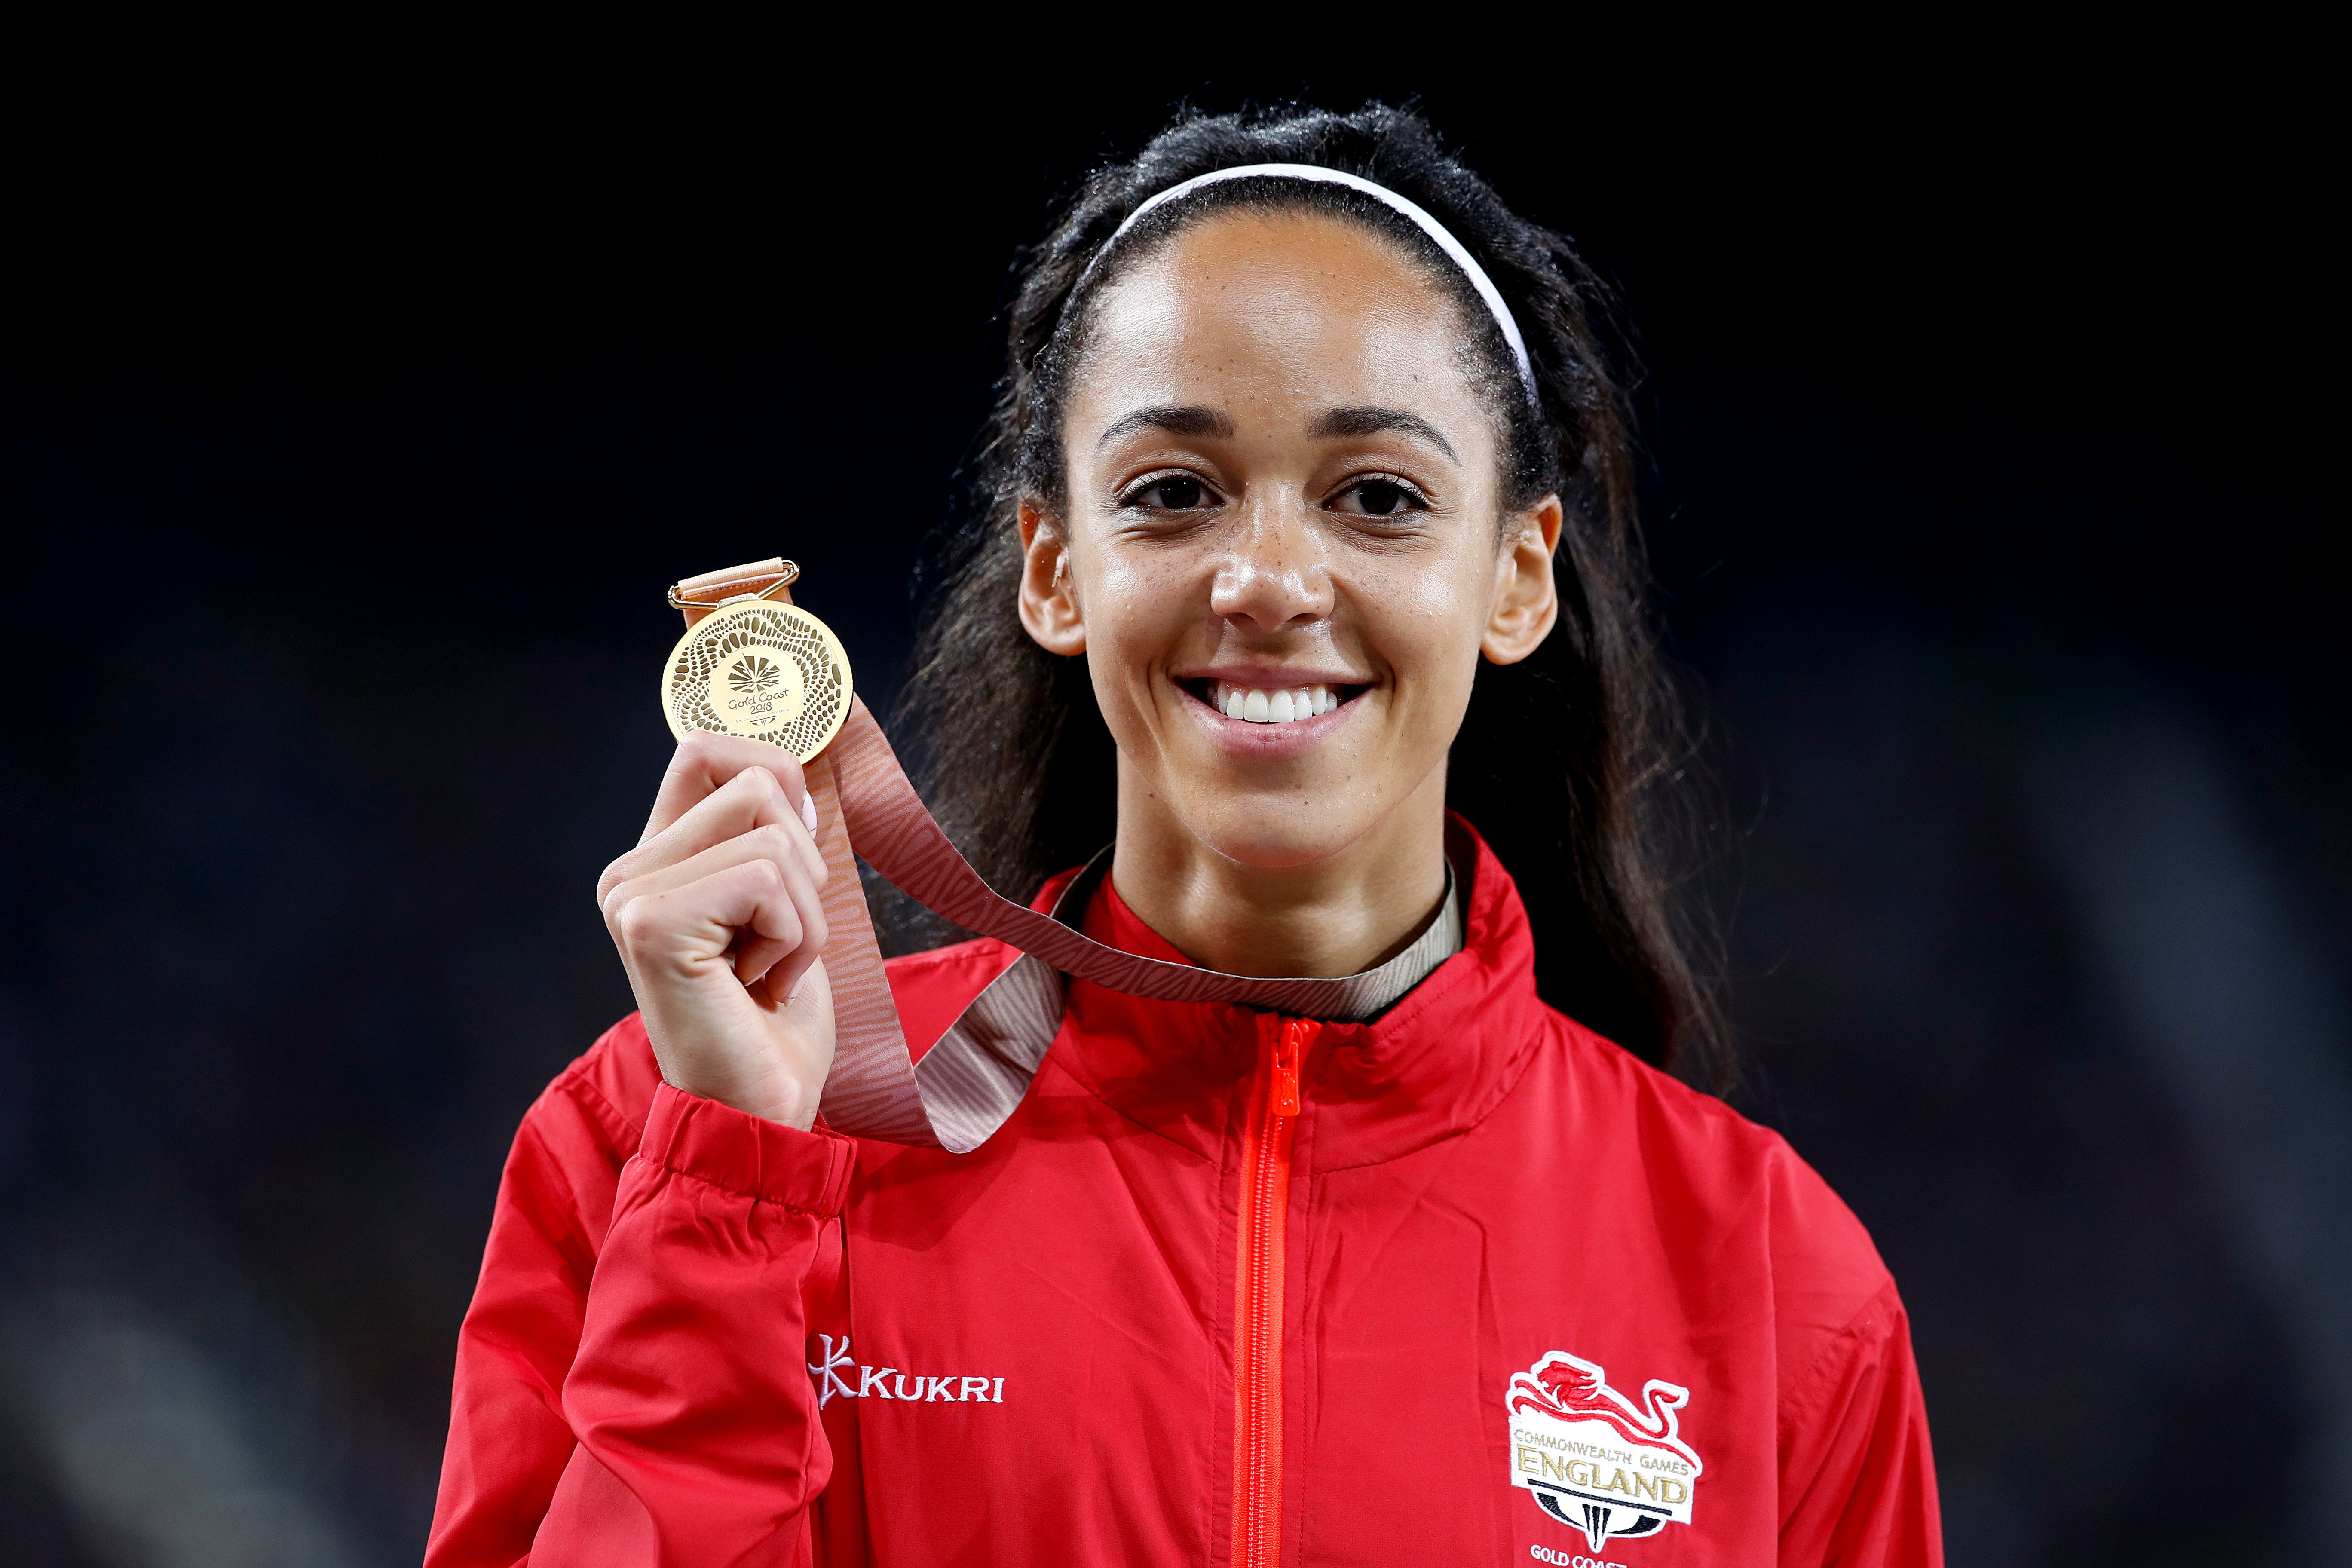 Katarina Johnson-Thompson celebrates with her gold medal at the 2018 Commonwealth Games (Martin Rickett/PA)